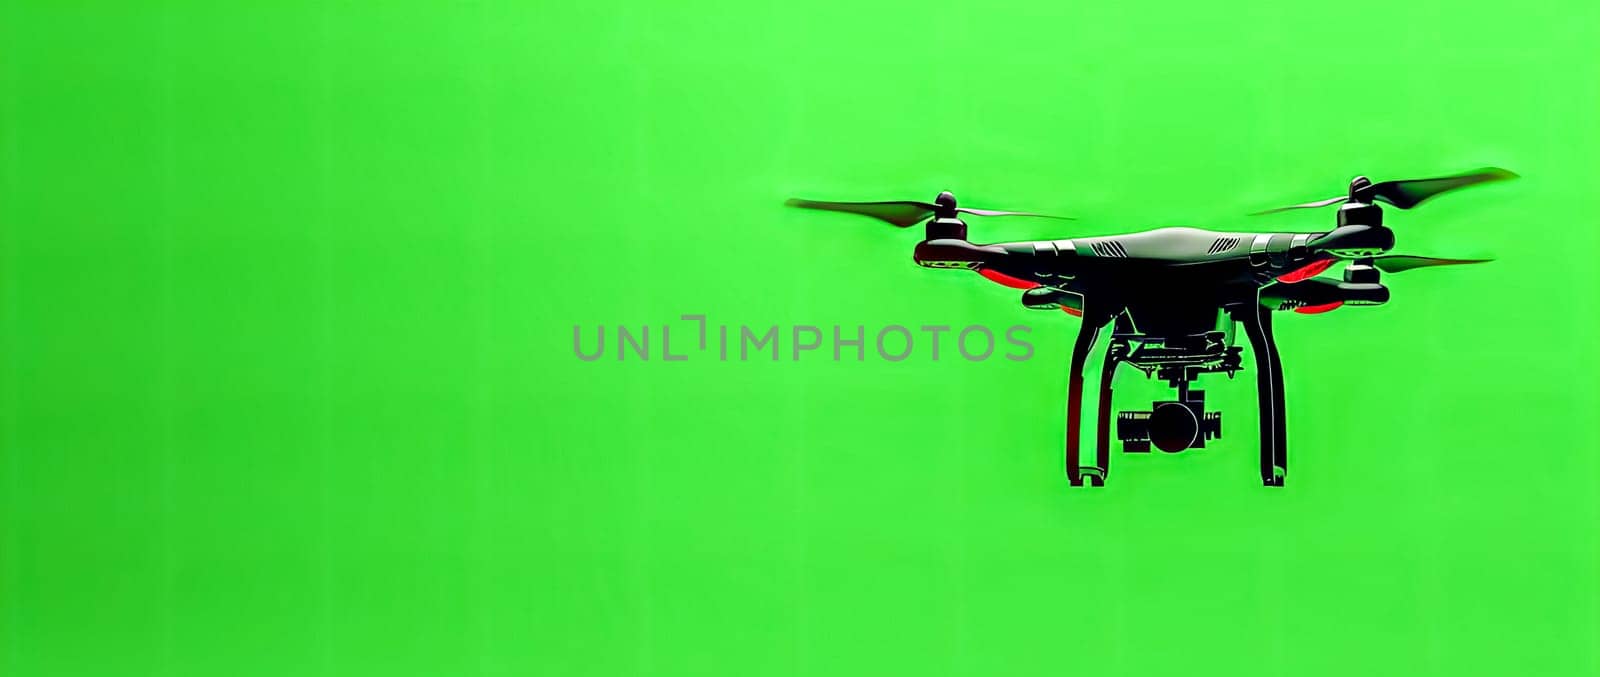 A drone hovering above a green screen table with electric blue liquid, copy space by Edophoto